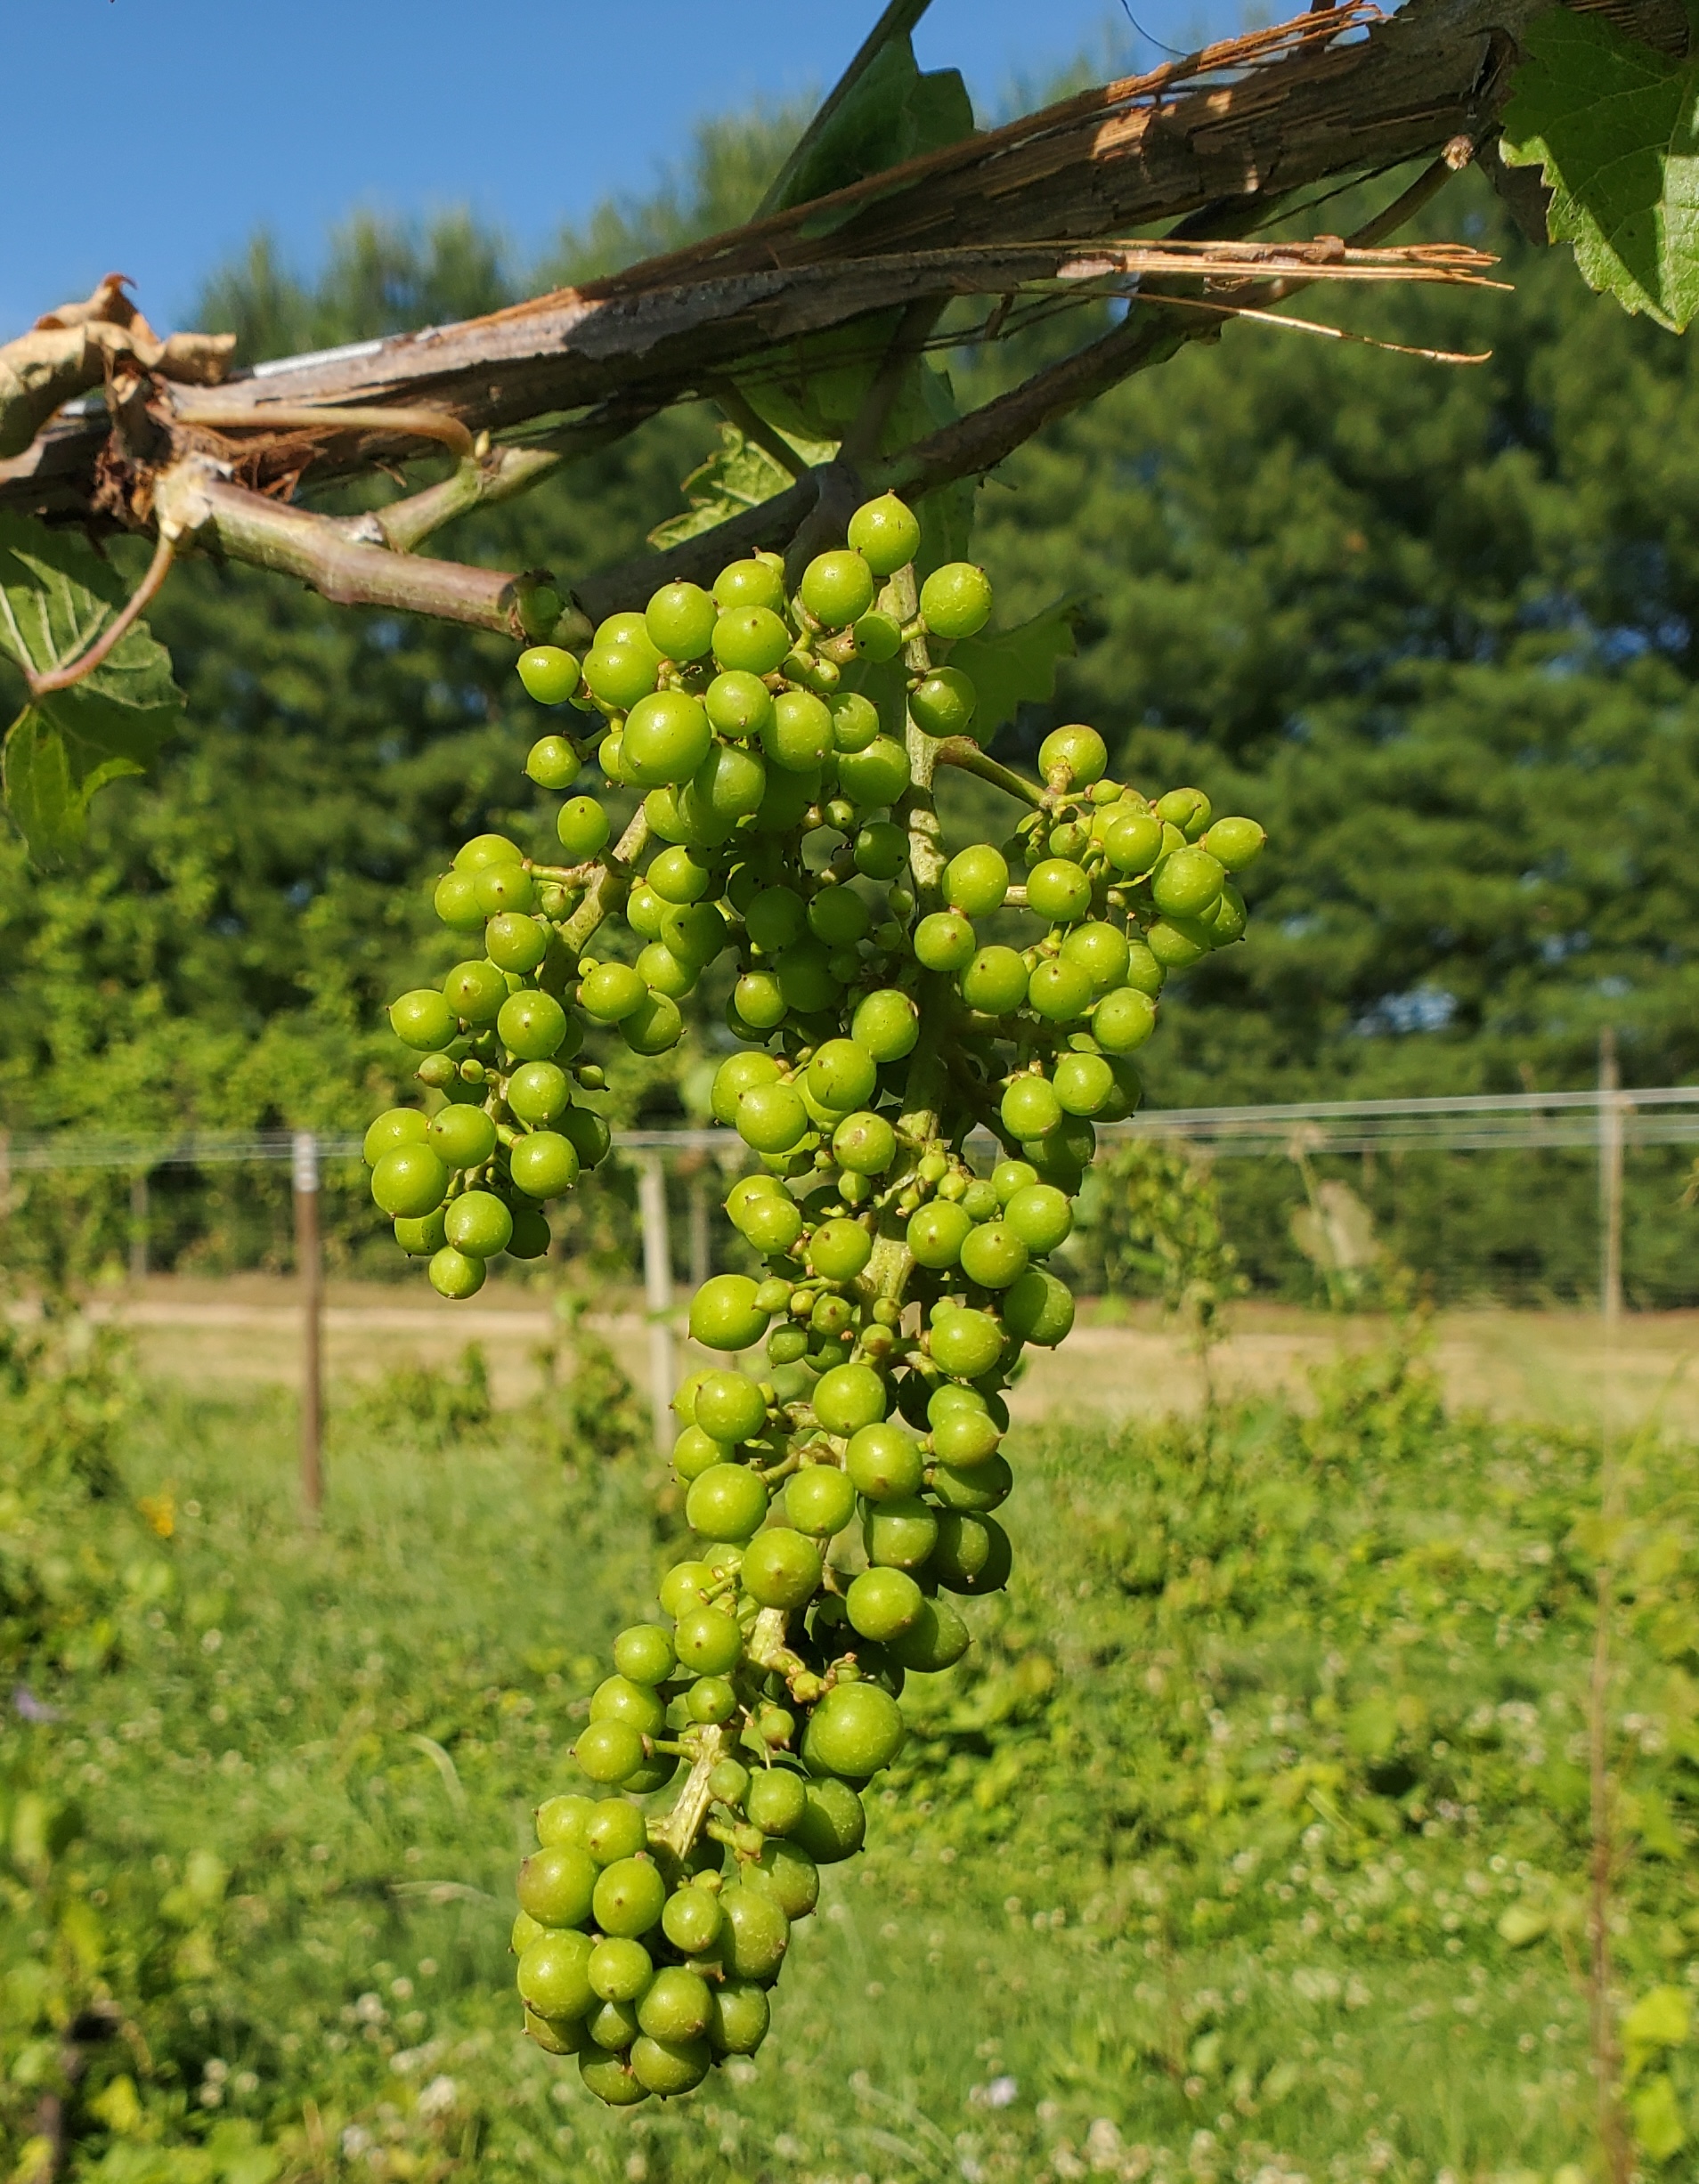 A cluster of grapes hanging from a tree.